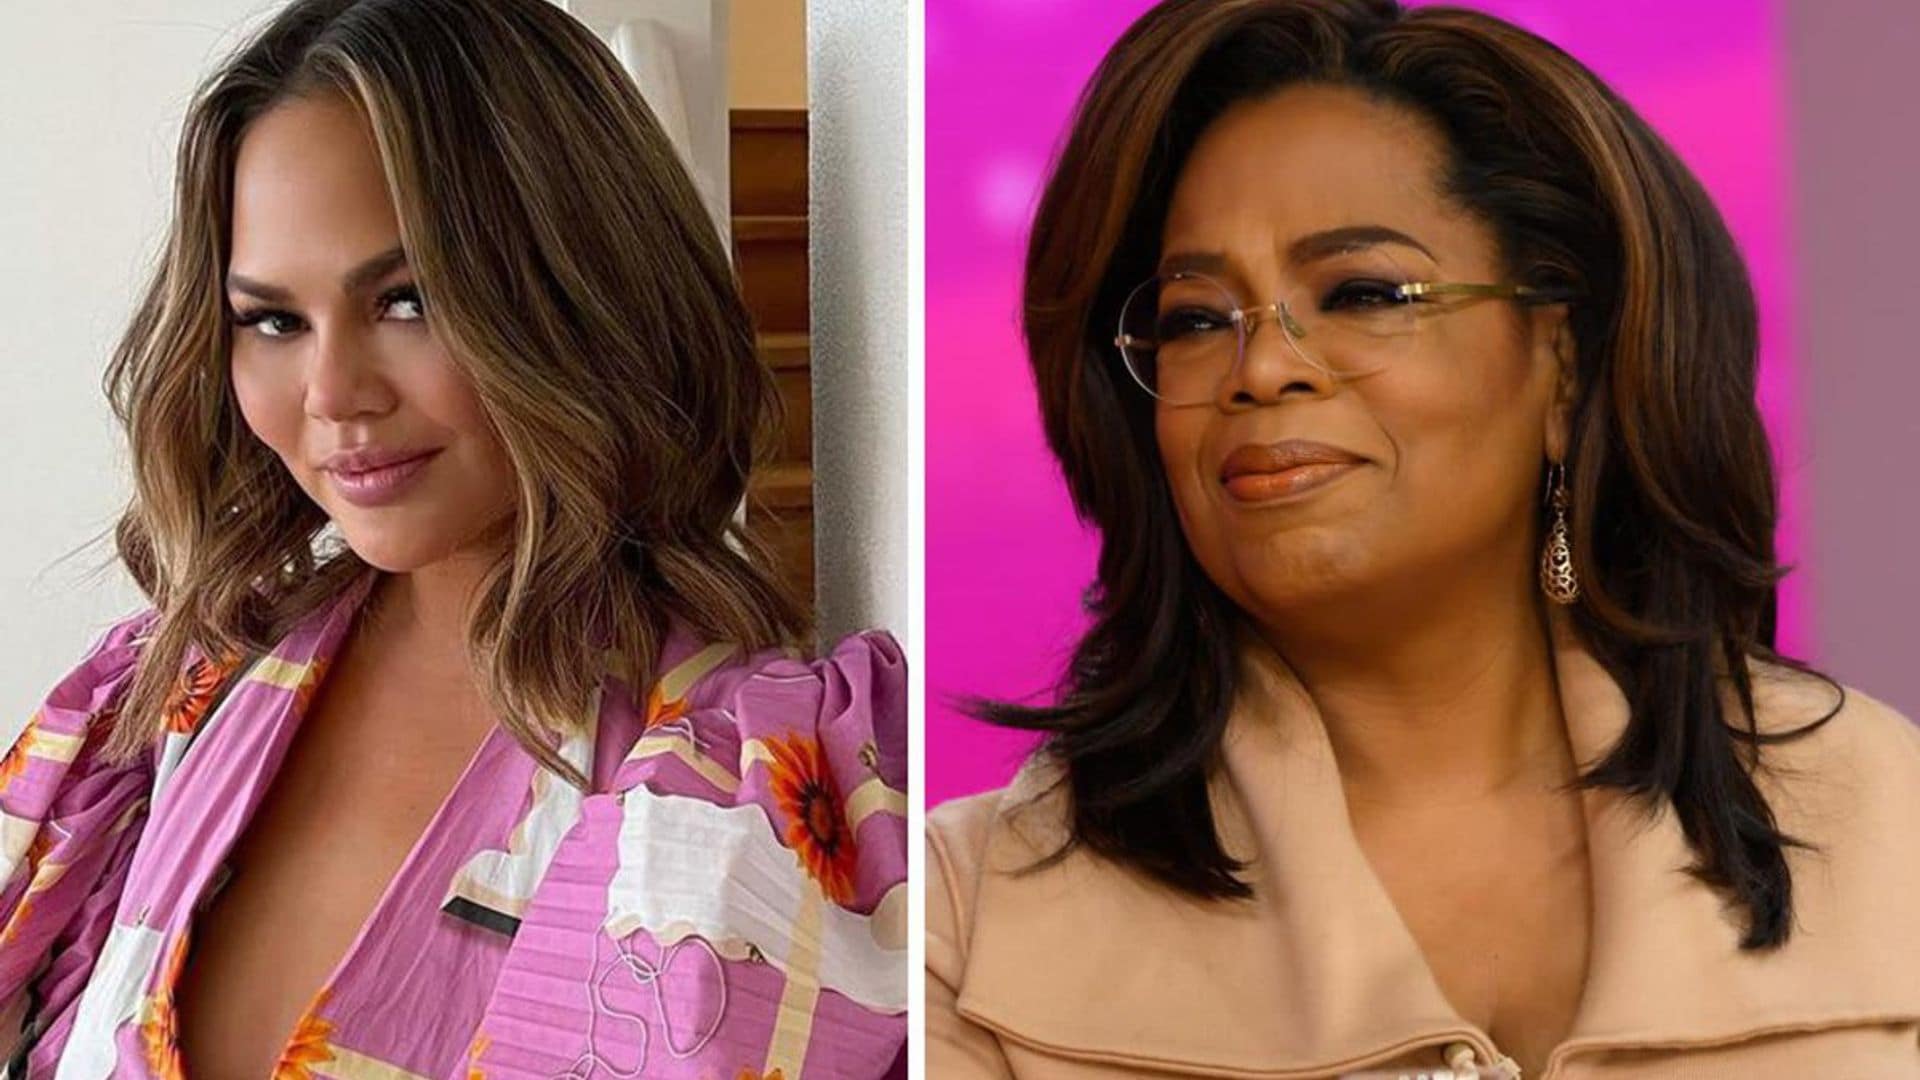 Chrissy Teigen wants Oprah Winfrey to be her first on-camera interview after cyberbullying controversy